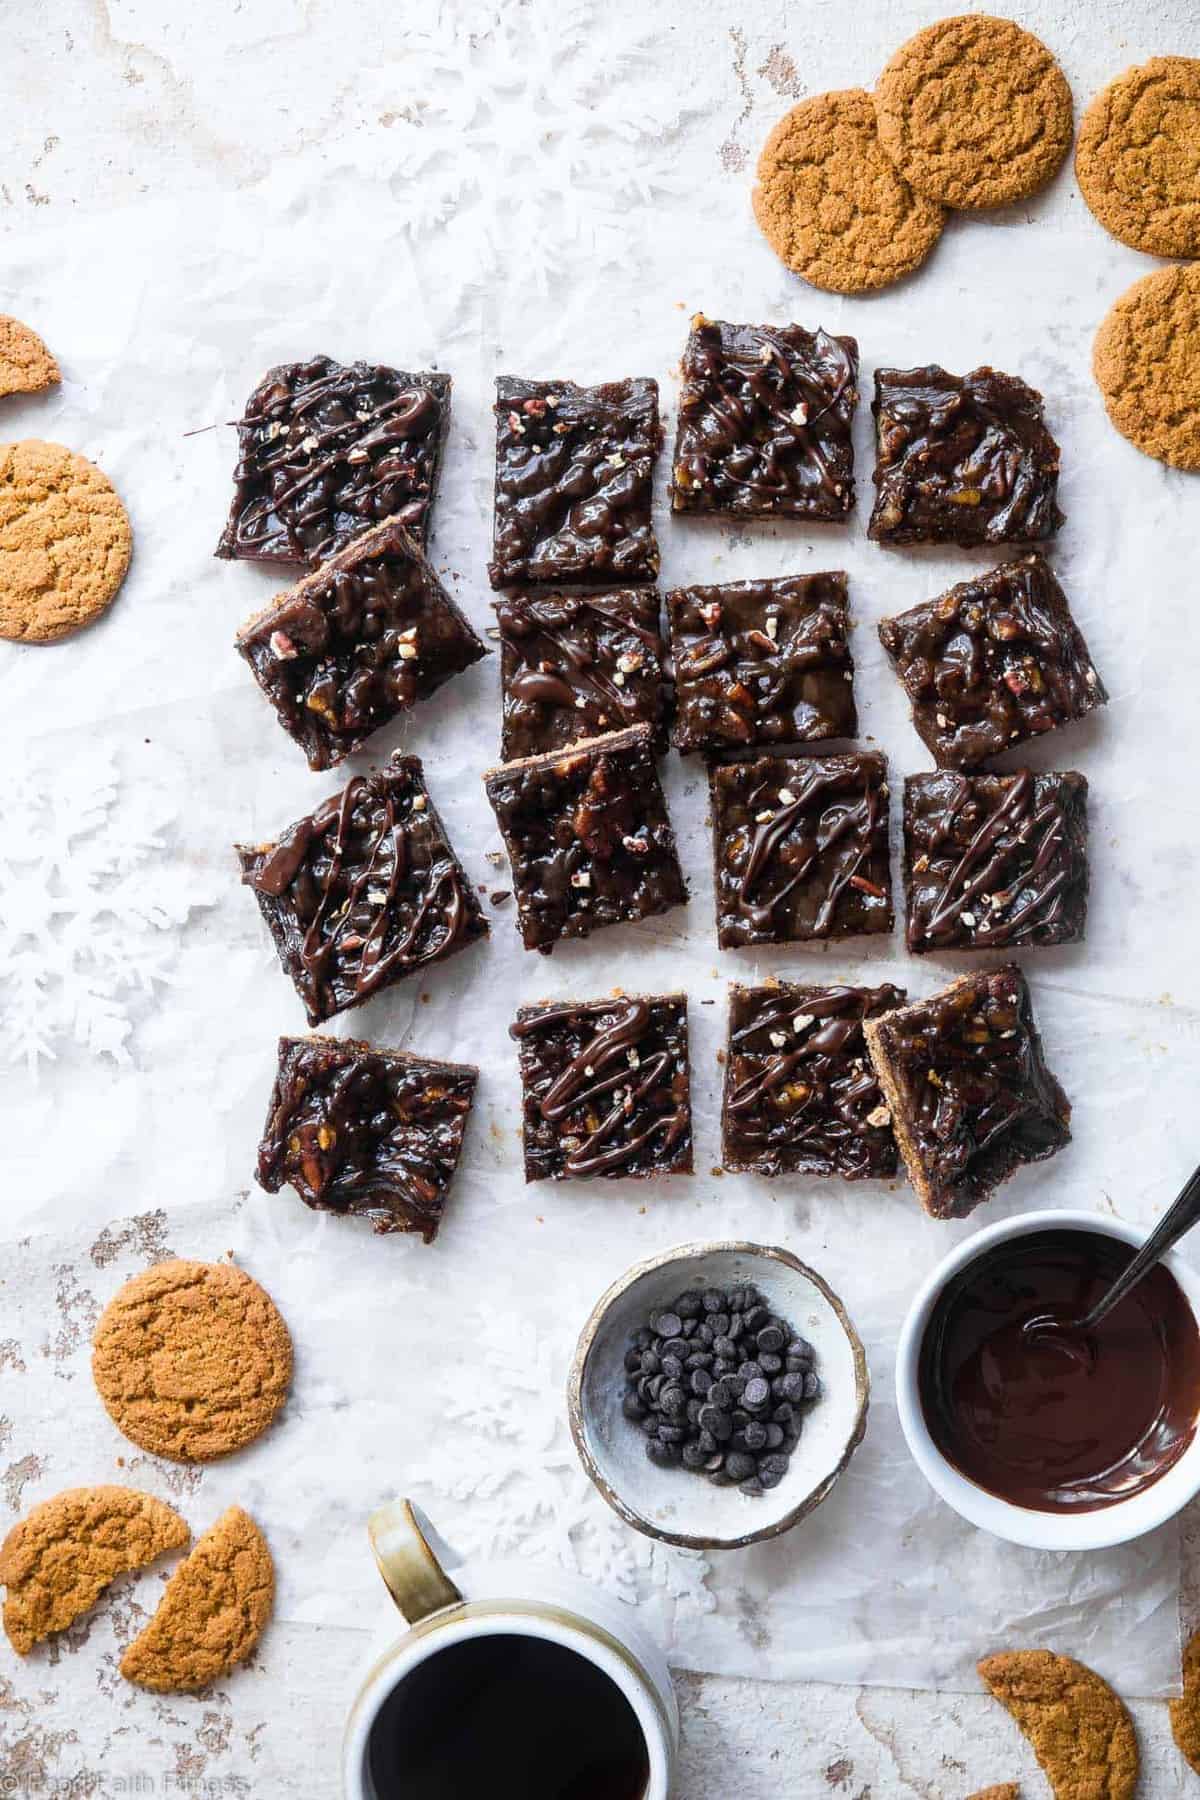 Gingersnap Chocolate Paleo Magic Cookie bars - These OOEY GOOEY, gluten free and vegan magic bars have spicy-sweet, cozy festive flavor and are SO easy to make! Perfect for a healthy, dairy free holiday treat! | #Foodfaithfitness 